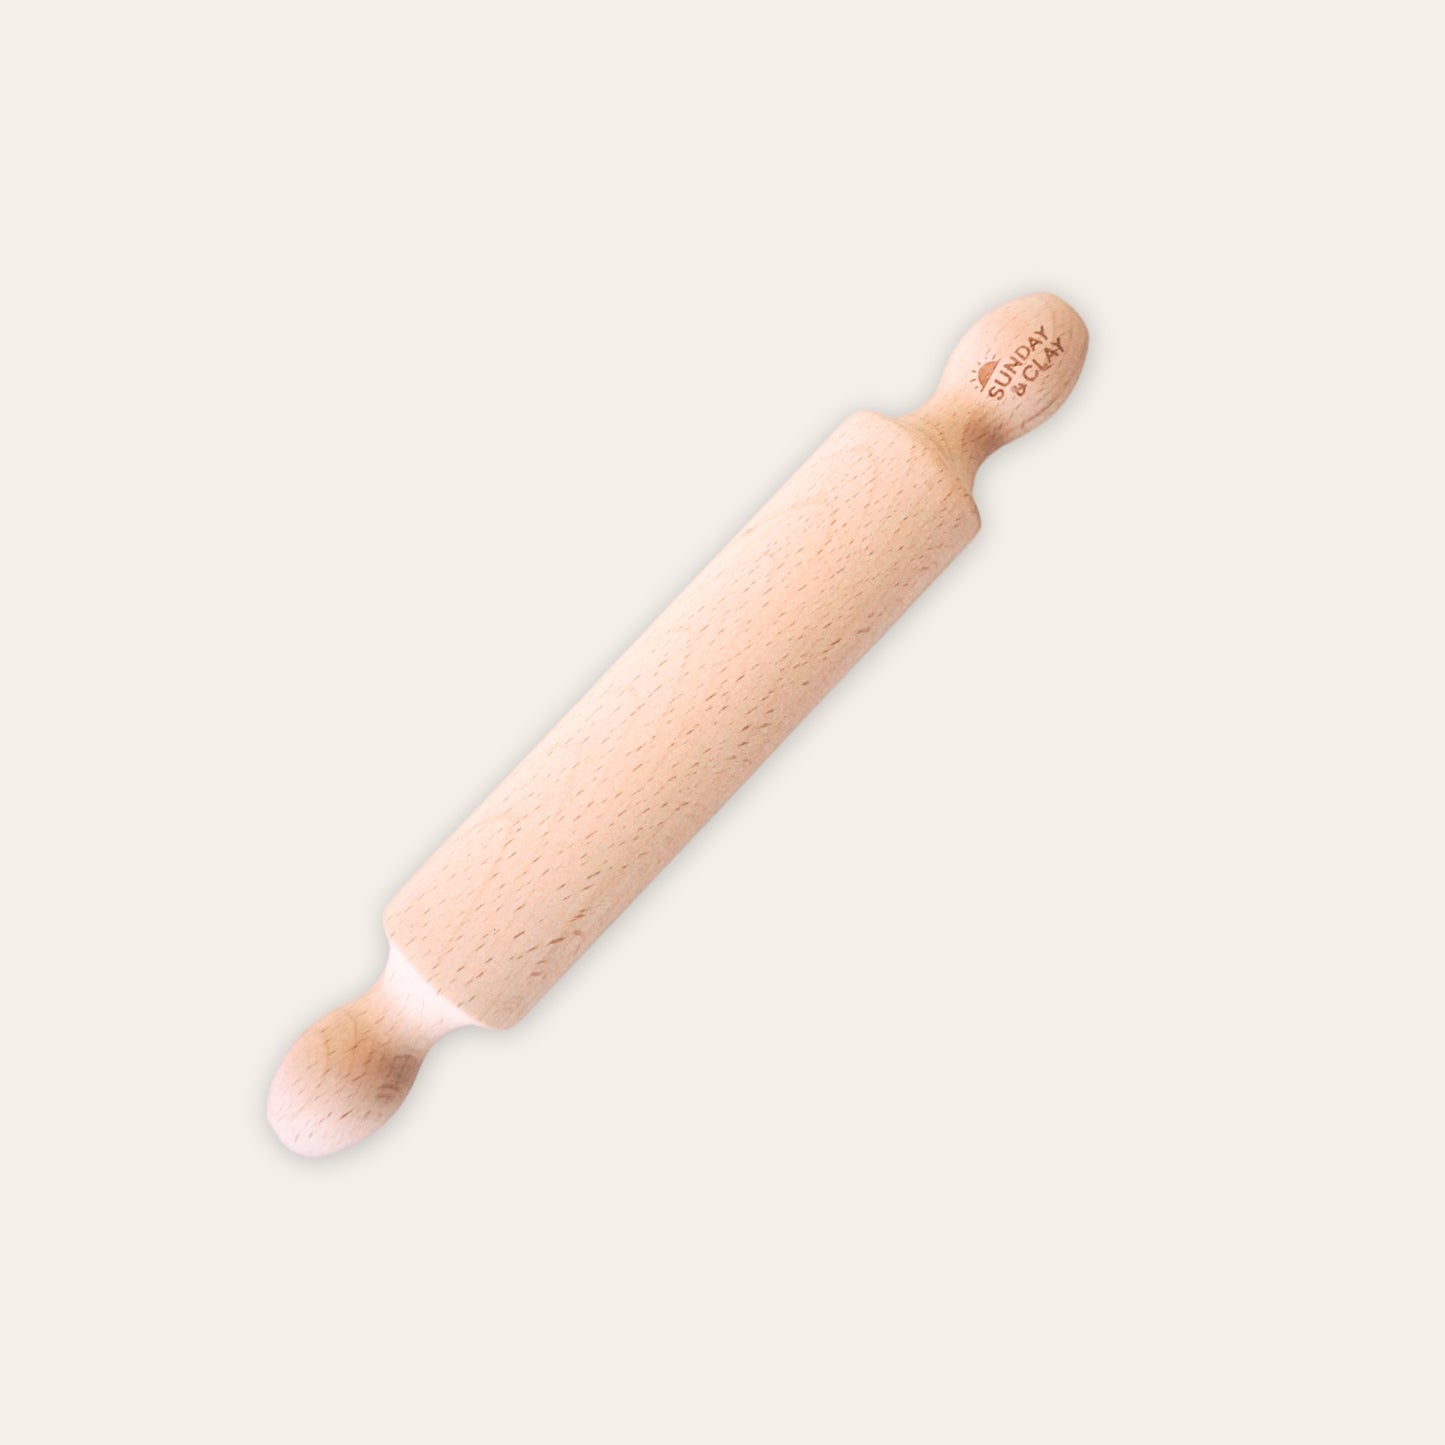 Clay rolling pin by Sunday & Clay.